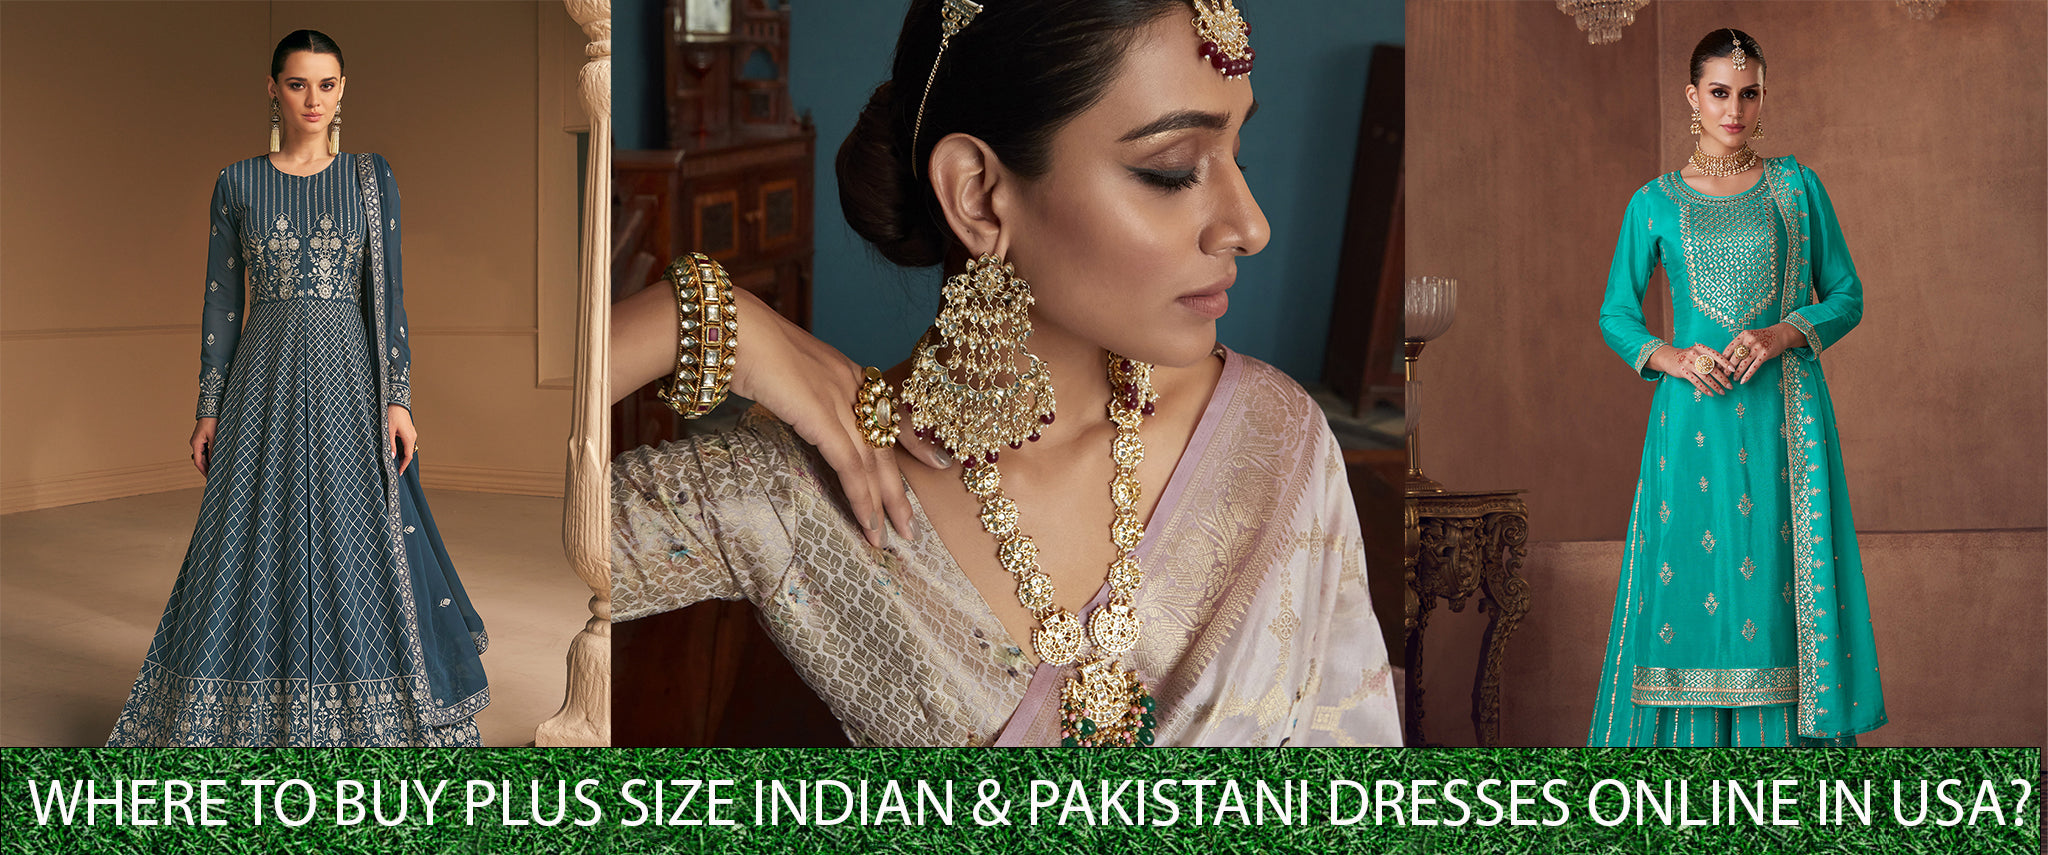 Where to Buy Plus Size Indian & Pakistani Dresses Online in USA? 